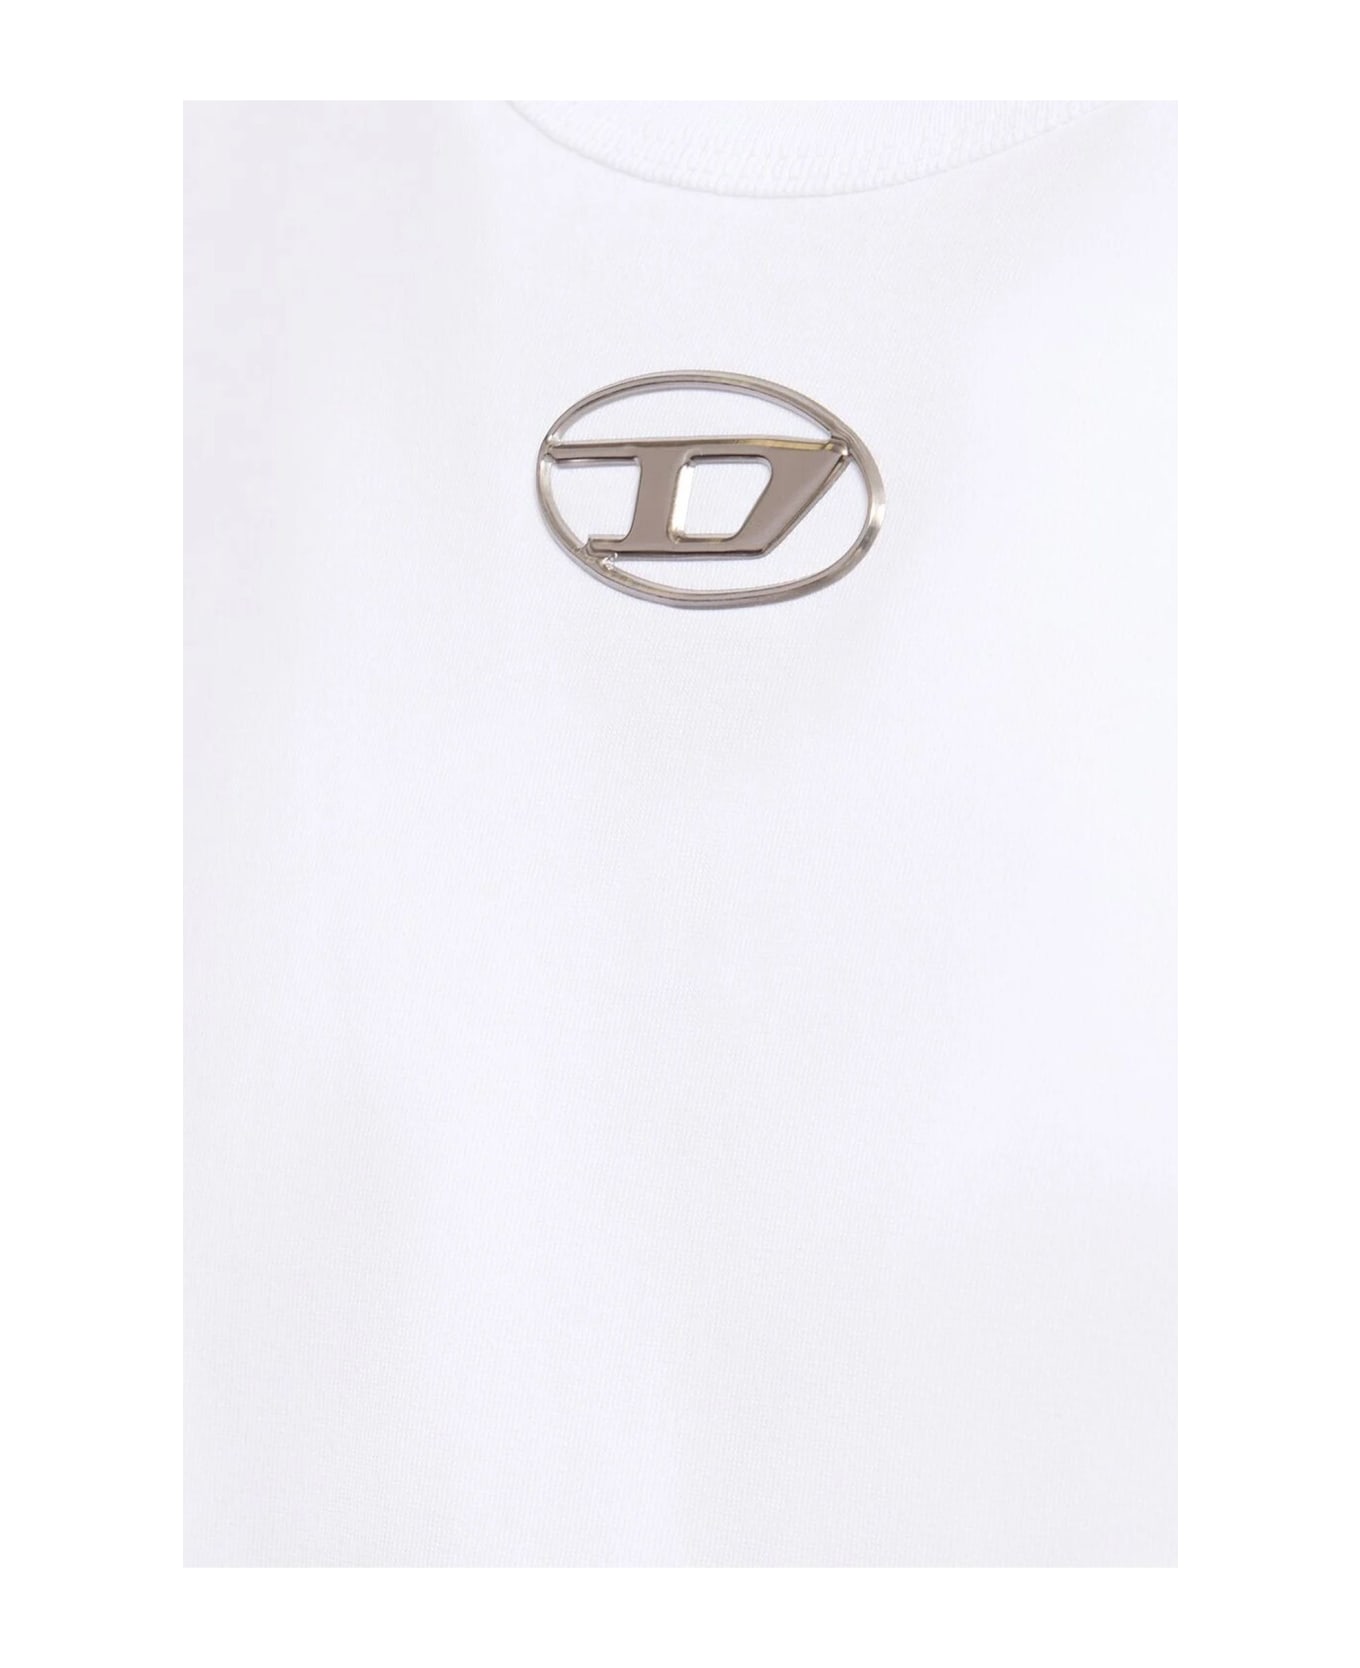 Diesel T-shirts And Polos White - White